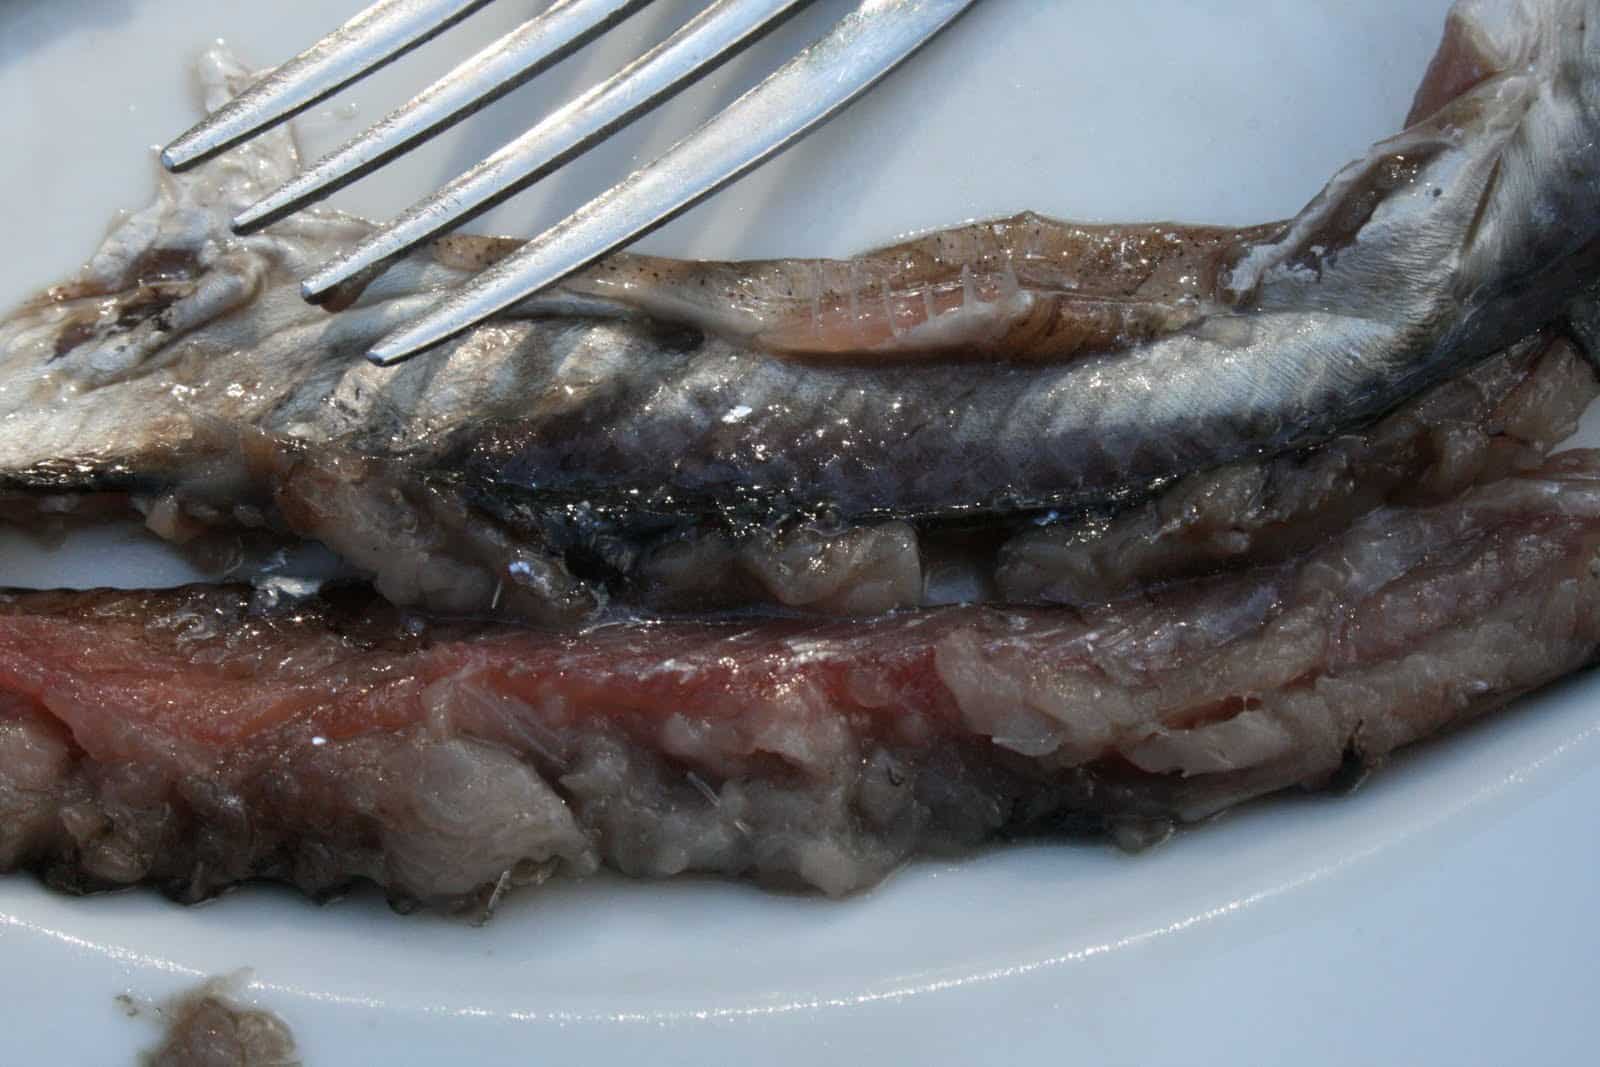 Curious Dishes: Surströmming - why do people eat rotten Herring?